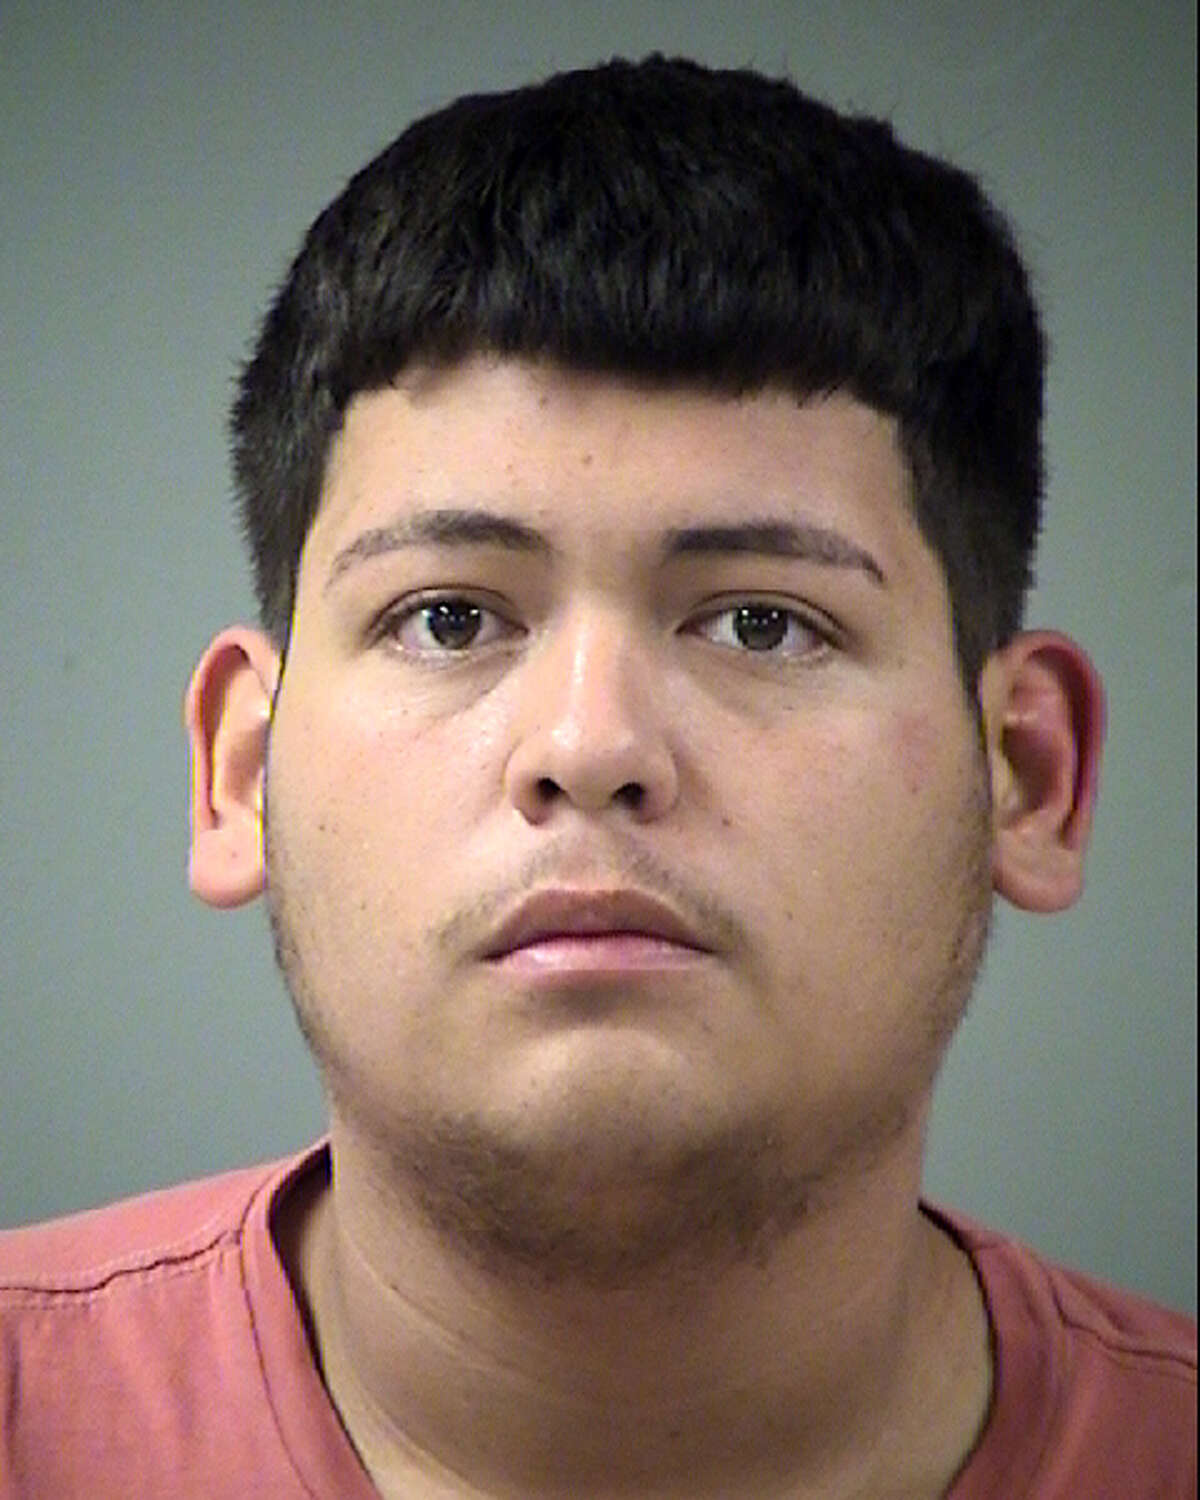 The alleged dog napper, 21-yeaer-old John Michael Garcia, now faces a charge of theft between $2,500 and $30,000.